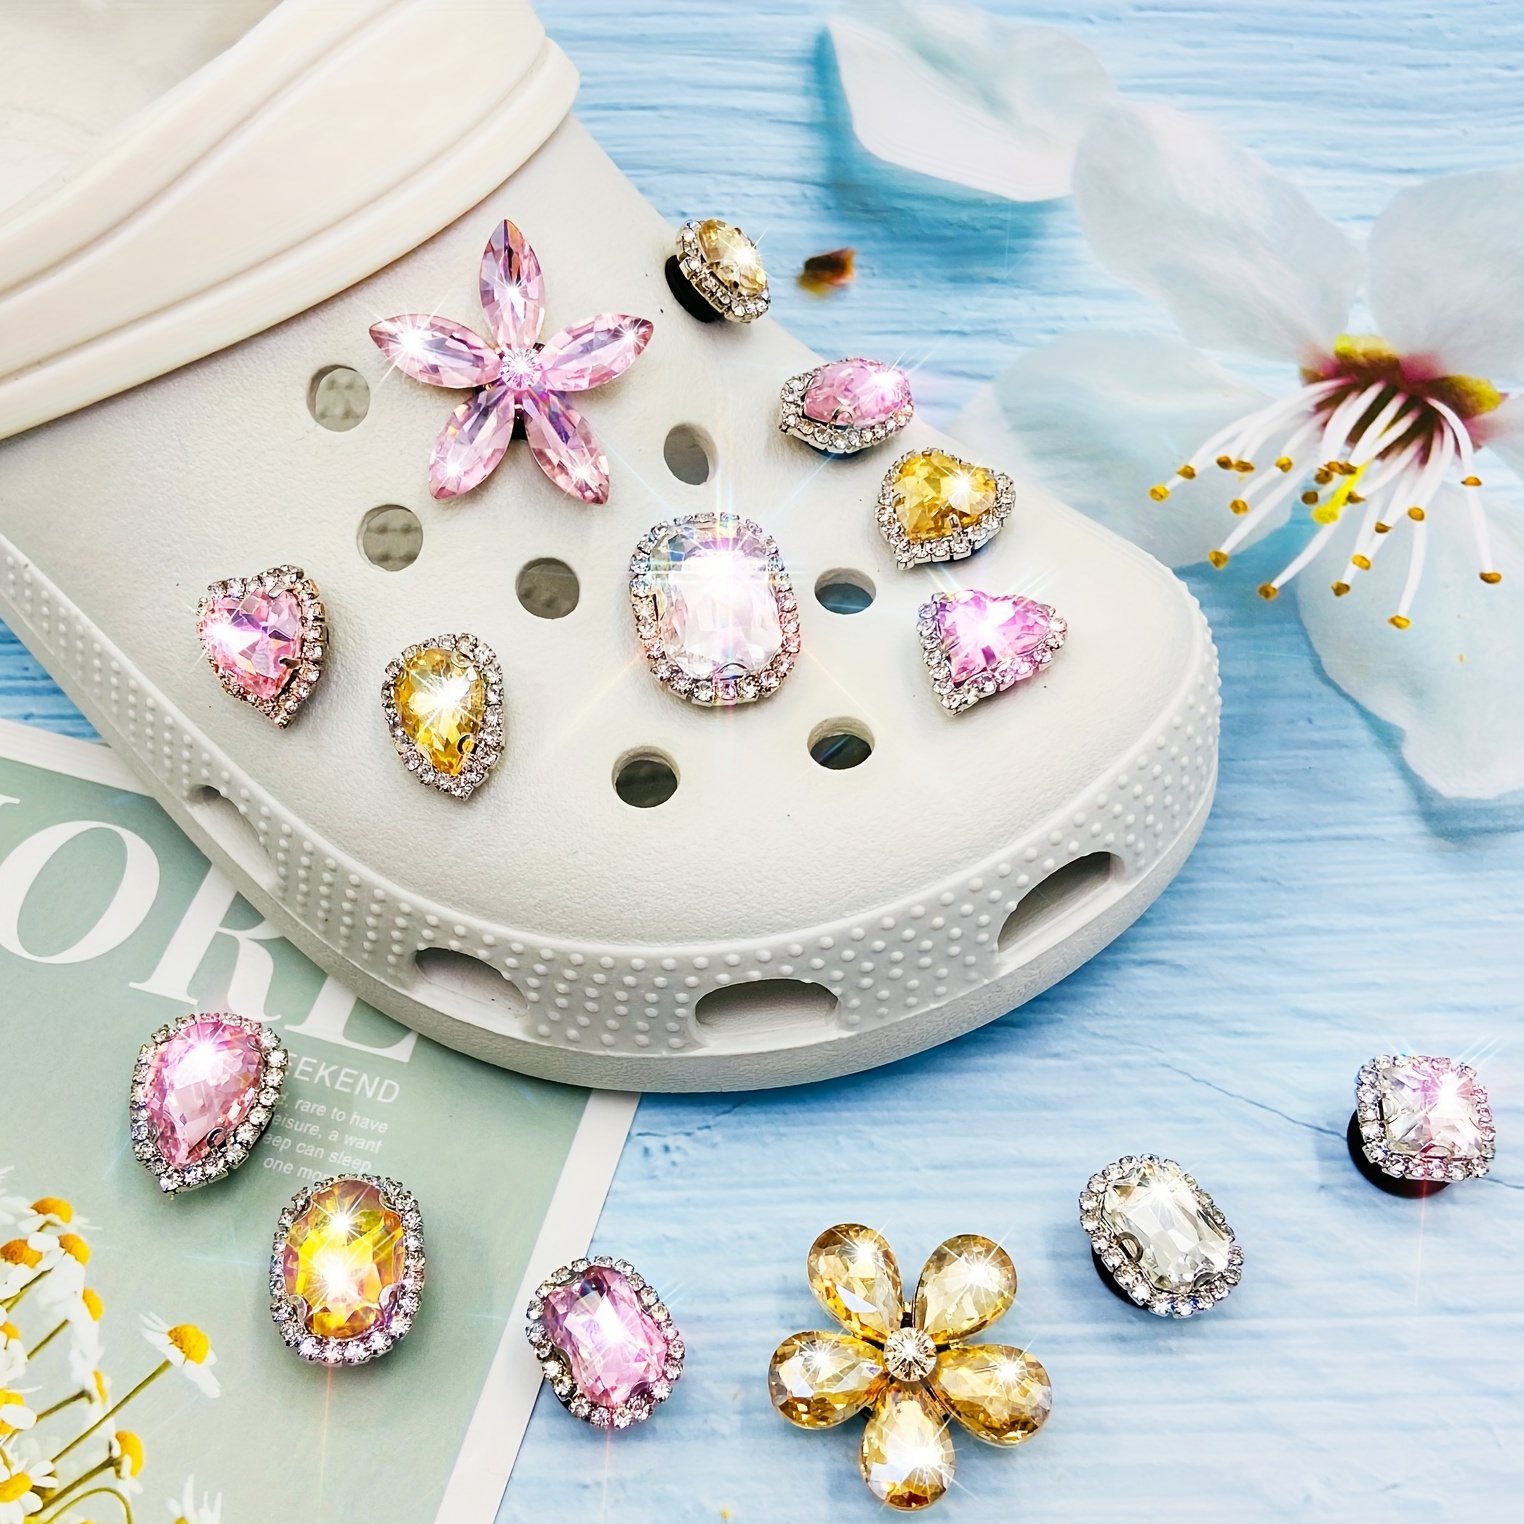 Bling Shoe Charms Women and girls - Fashion Luxury Designer Shoe Charms Pack with Buttons and Chains, Trendy Jewels Accessories, Party, Birthday